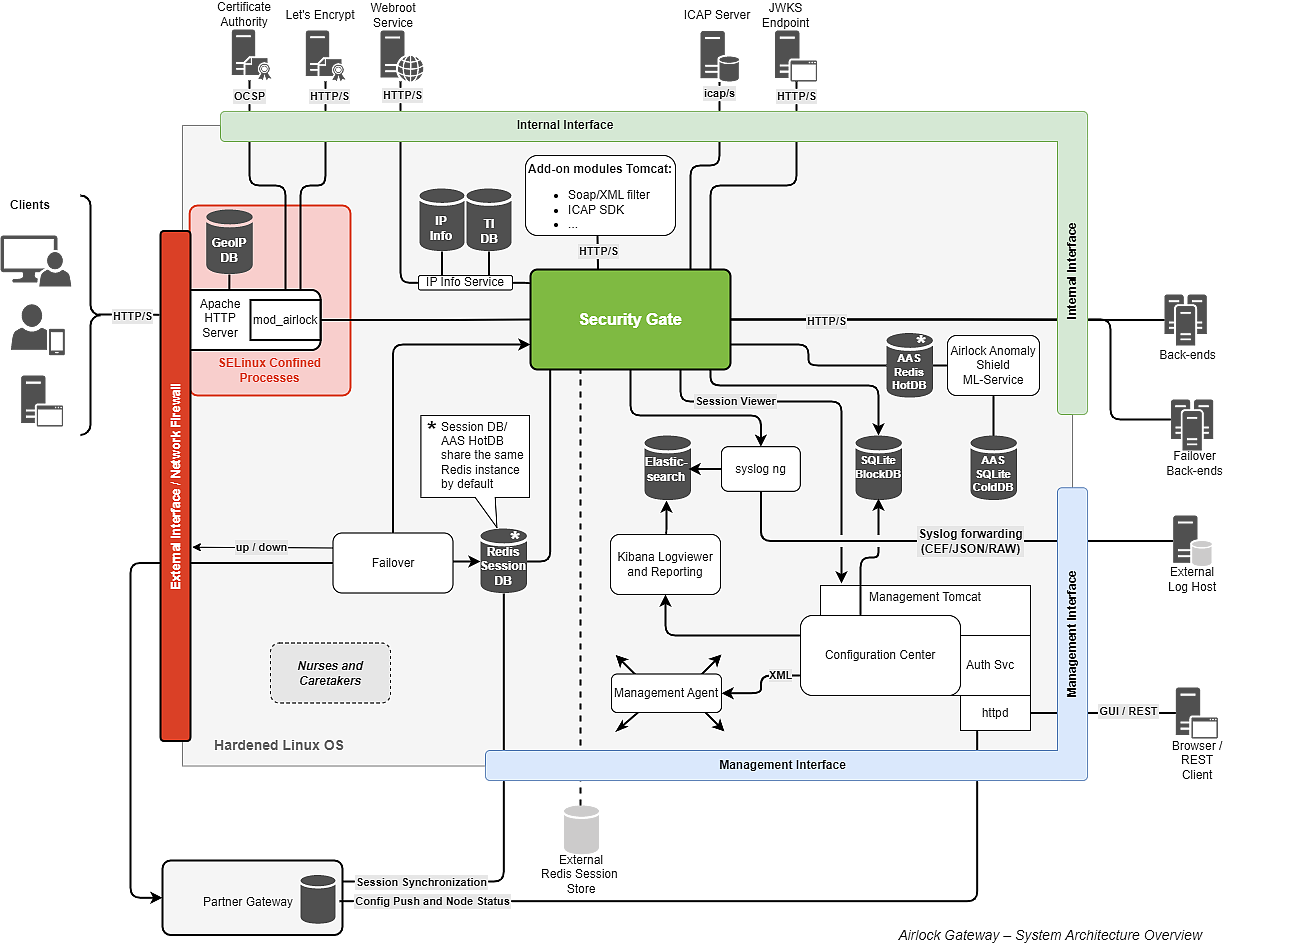 Airlock_Gateway_8.0_and_later_ _System_Architecture_Overview